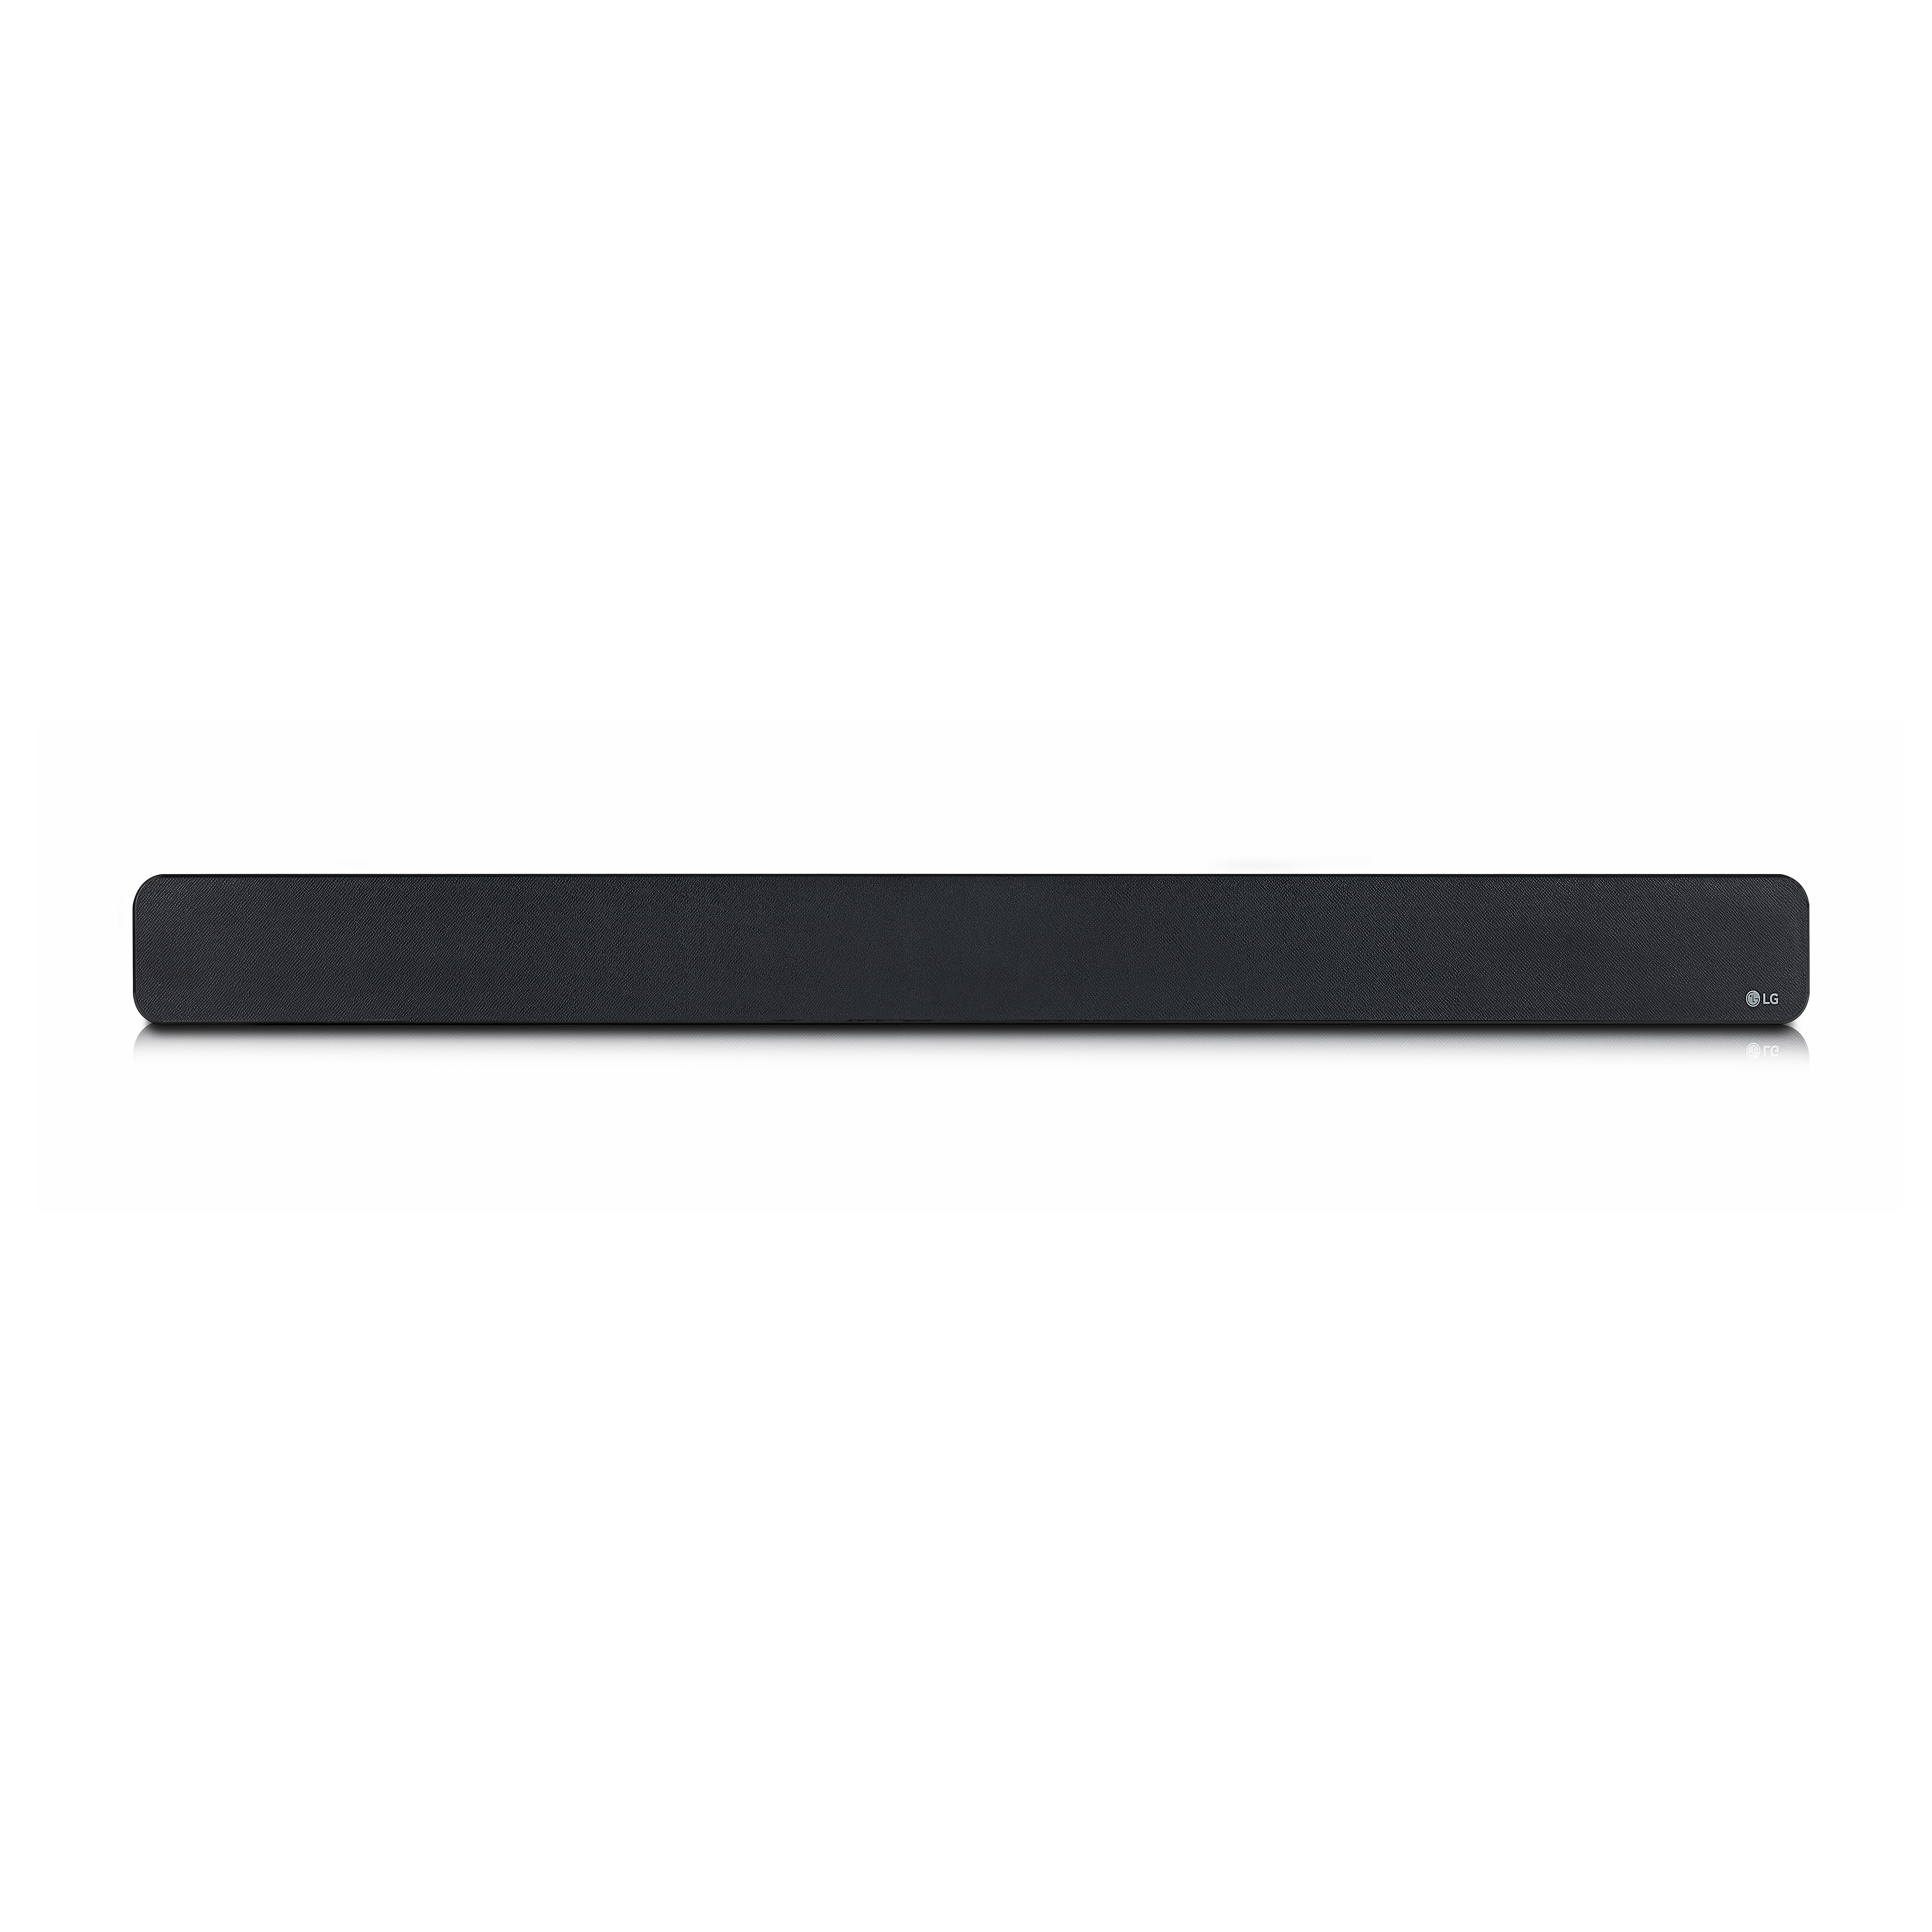 LG 3.1.2 Channel 440W High Res Audio Soundbar with Dolby Atmos® and Google Assistant Built-In - SL8YG - image 10 of 11